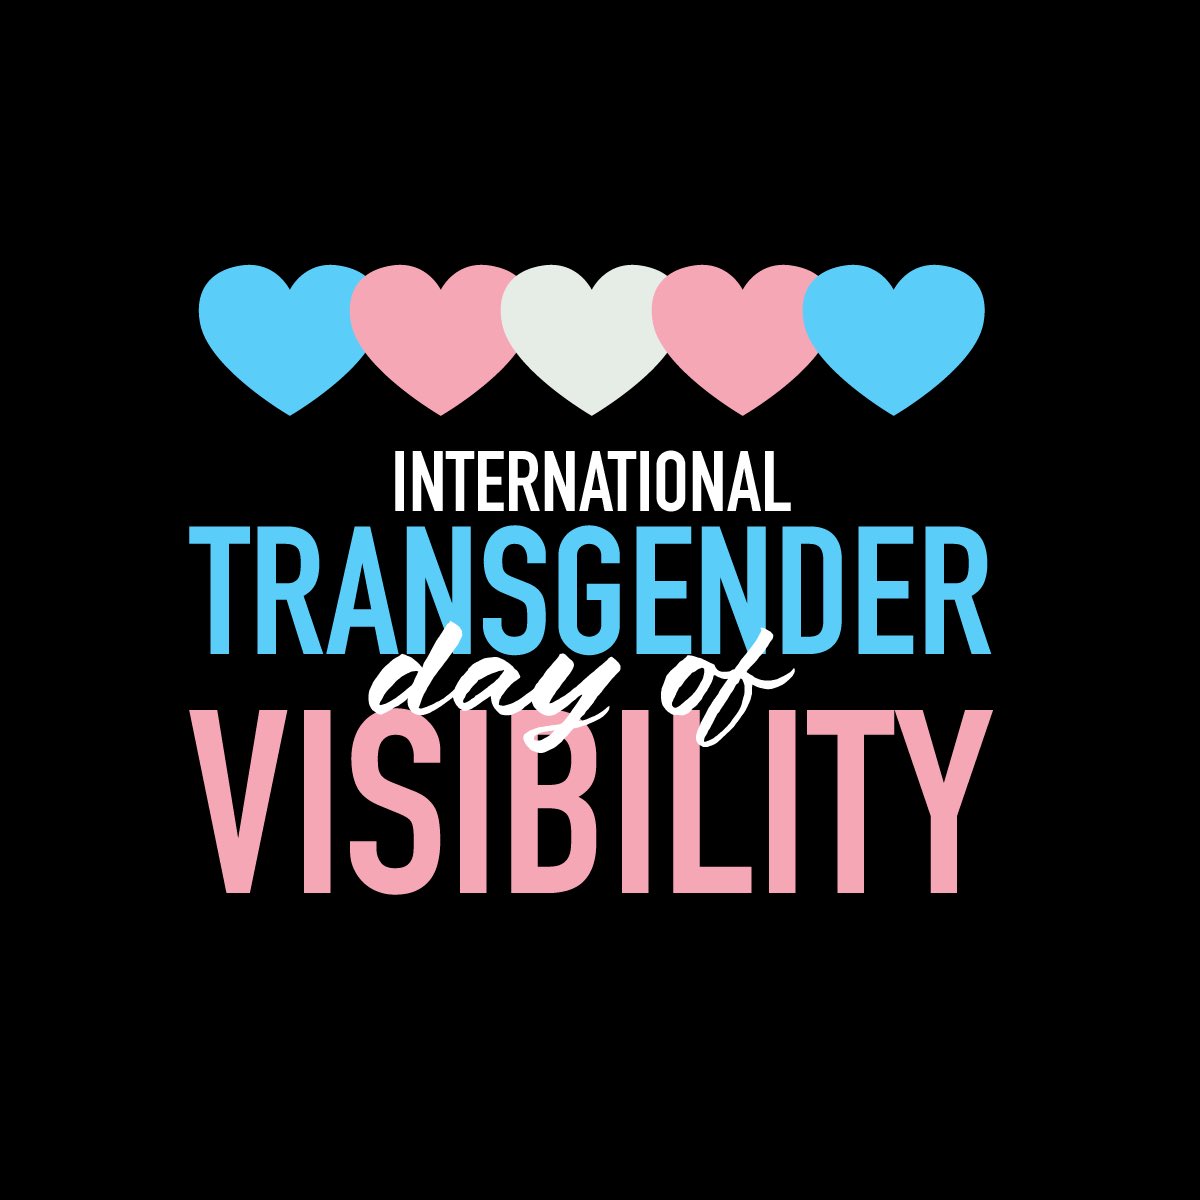 It’s International Transgender Day of Visibility, a time to honour the resilience and lived experiences of transgender, non-binary and Two-Spirit people. Let’s also reaffirm our commitment to speak out against anti-transgender hate and all forms of discrimination. #TDoV